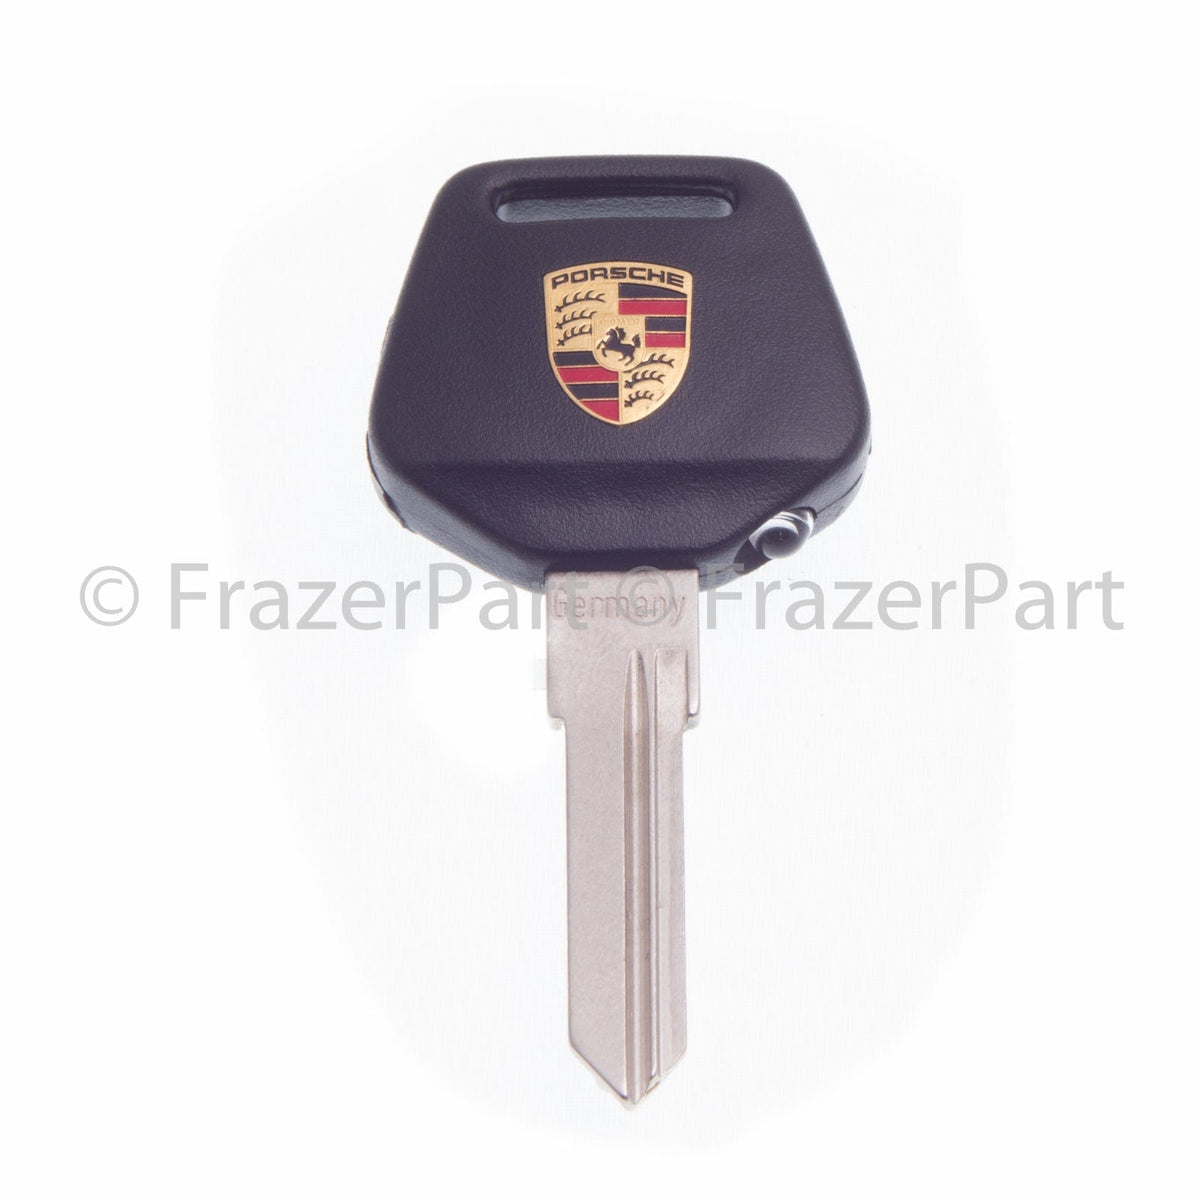 924, 944, 968 Porsche crested key head with light and blank key blade